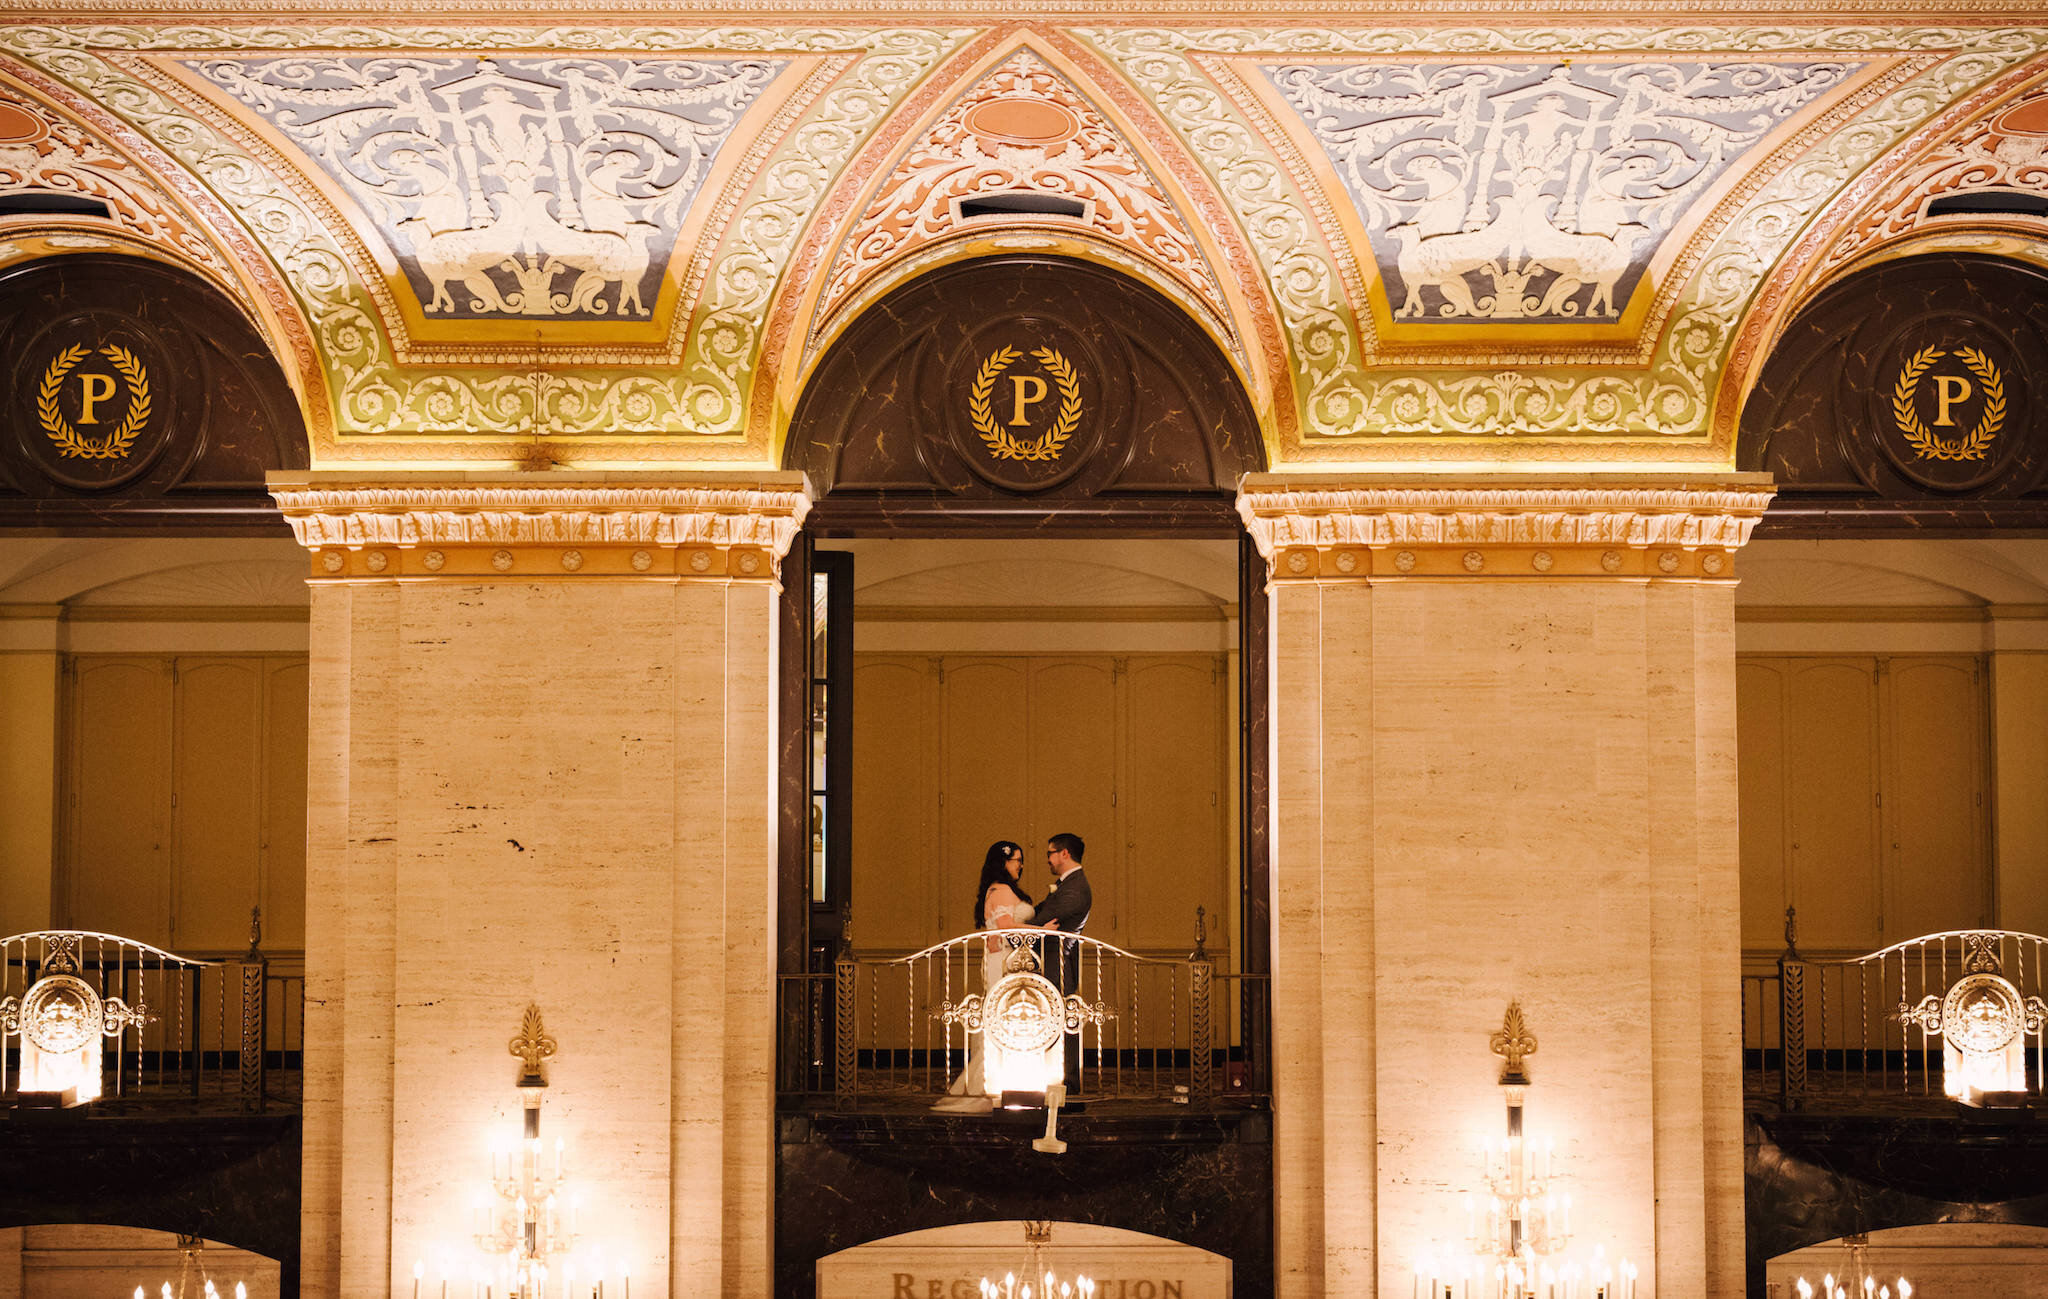 Wedding First Look: Elegant Jewel-Toned Wedding captured by Dorey Kronick featured on CHI thee WED